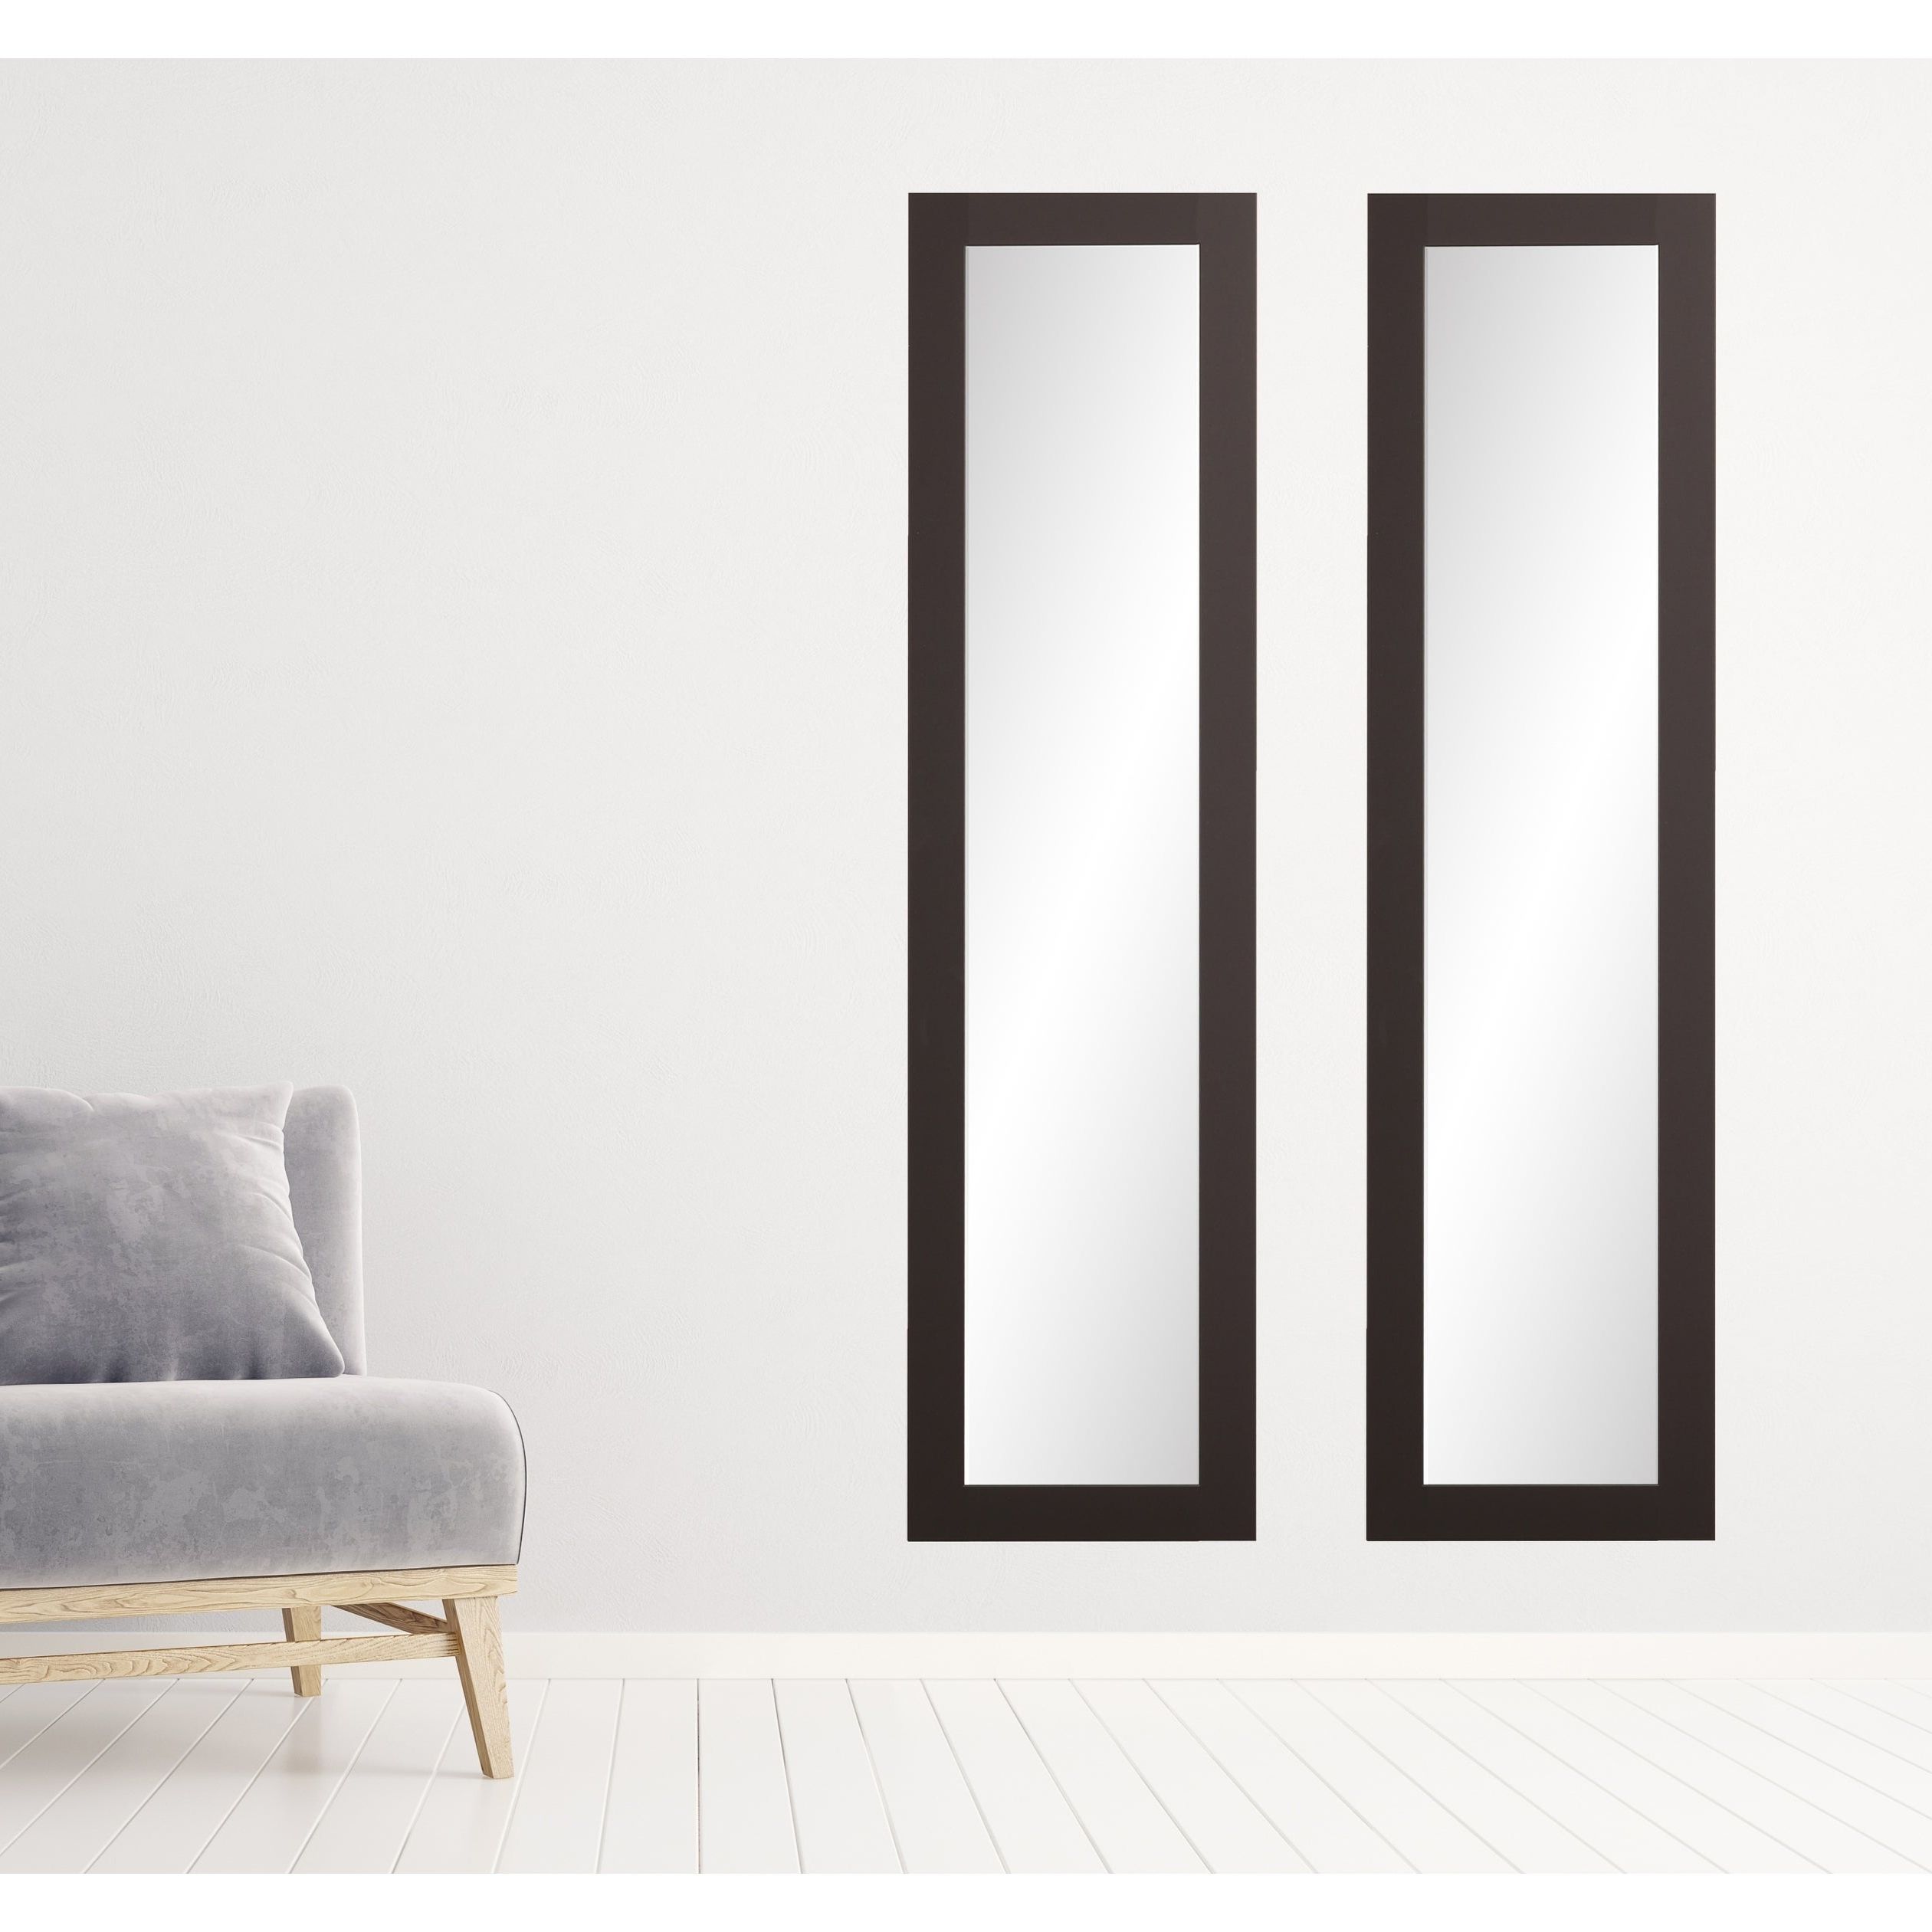 Slim Wall Mirrors Throughout Recent 2 Piece Slim Full Length Mirror Set – 16 X  (View 14 of 20)